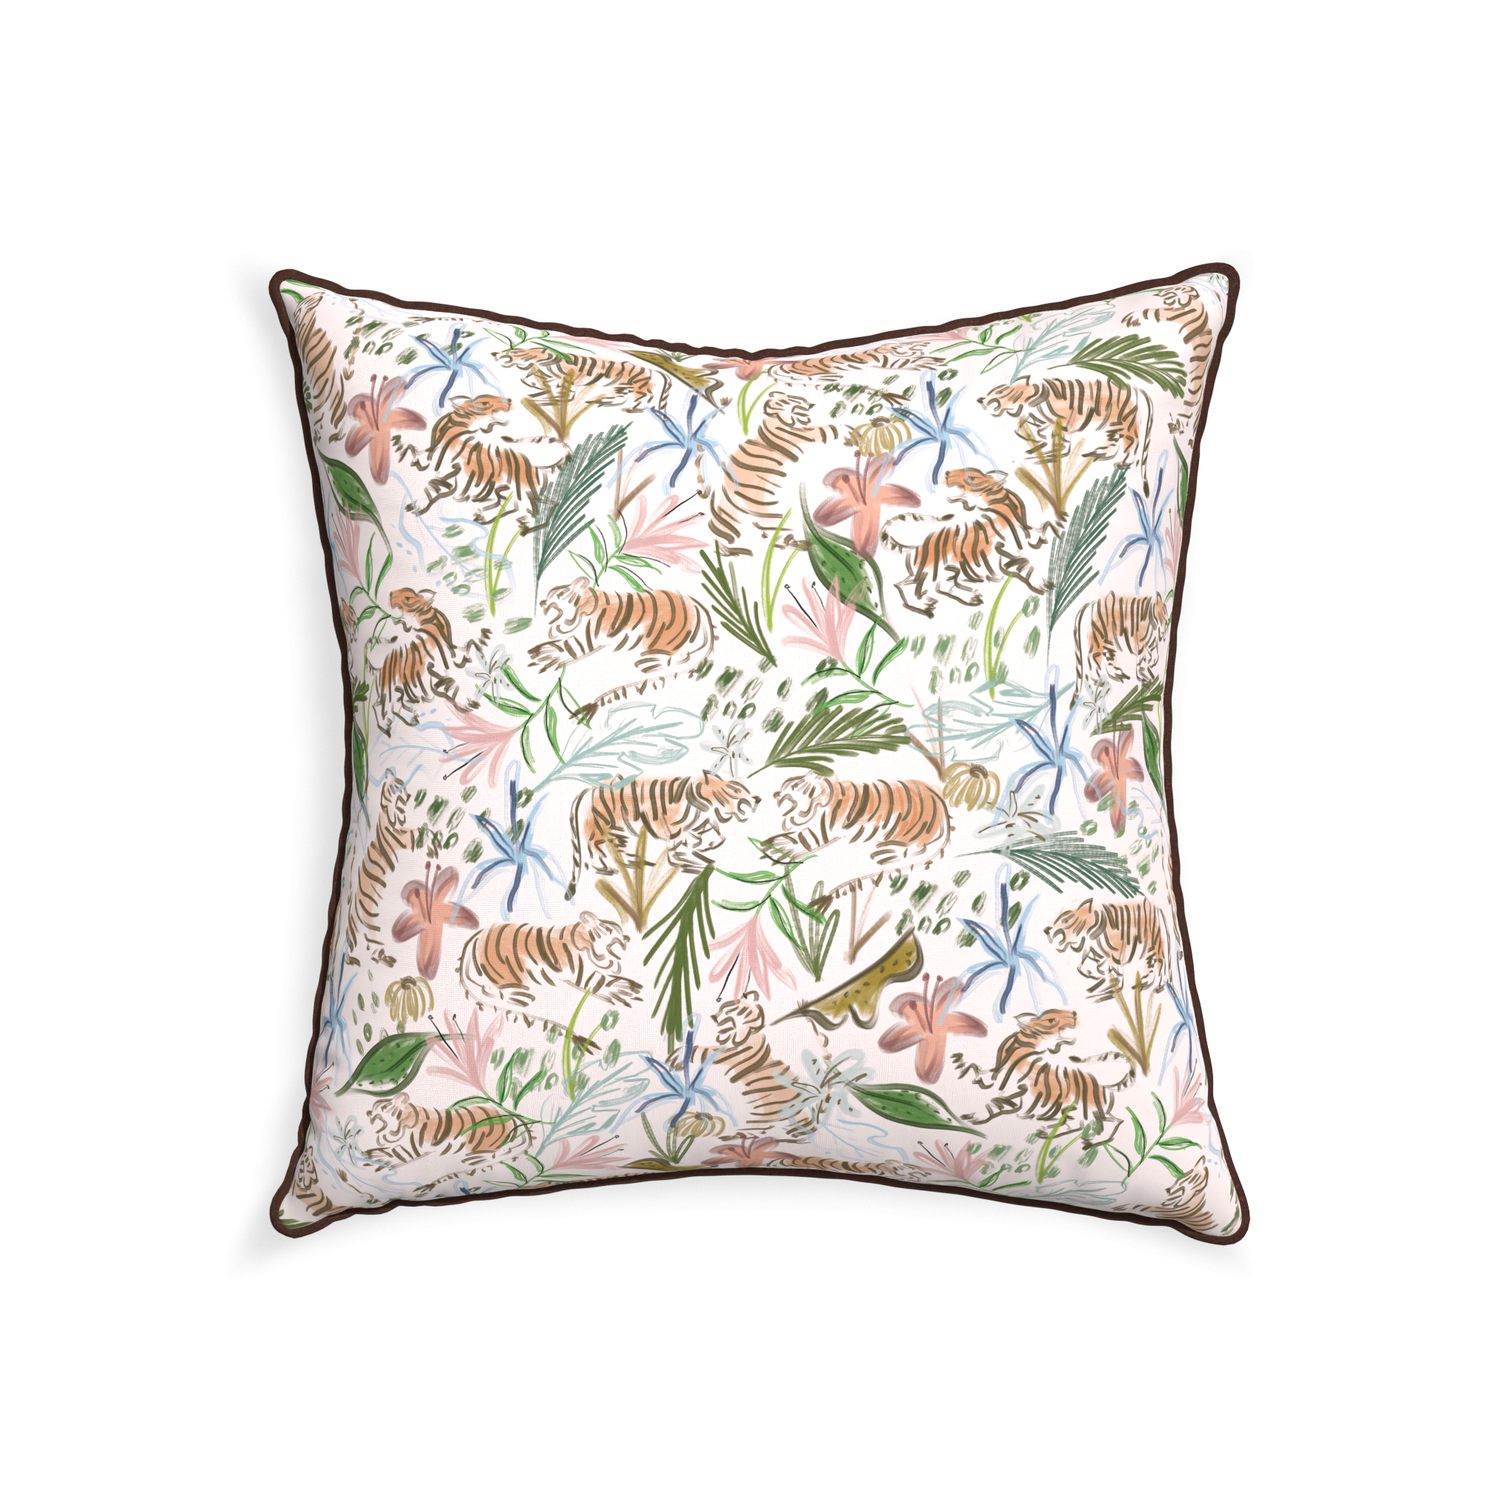 22-square frida pink custom pink chinoiserie tigerpillow with w piping on white background